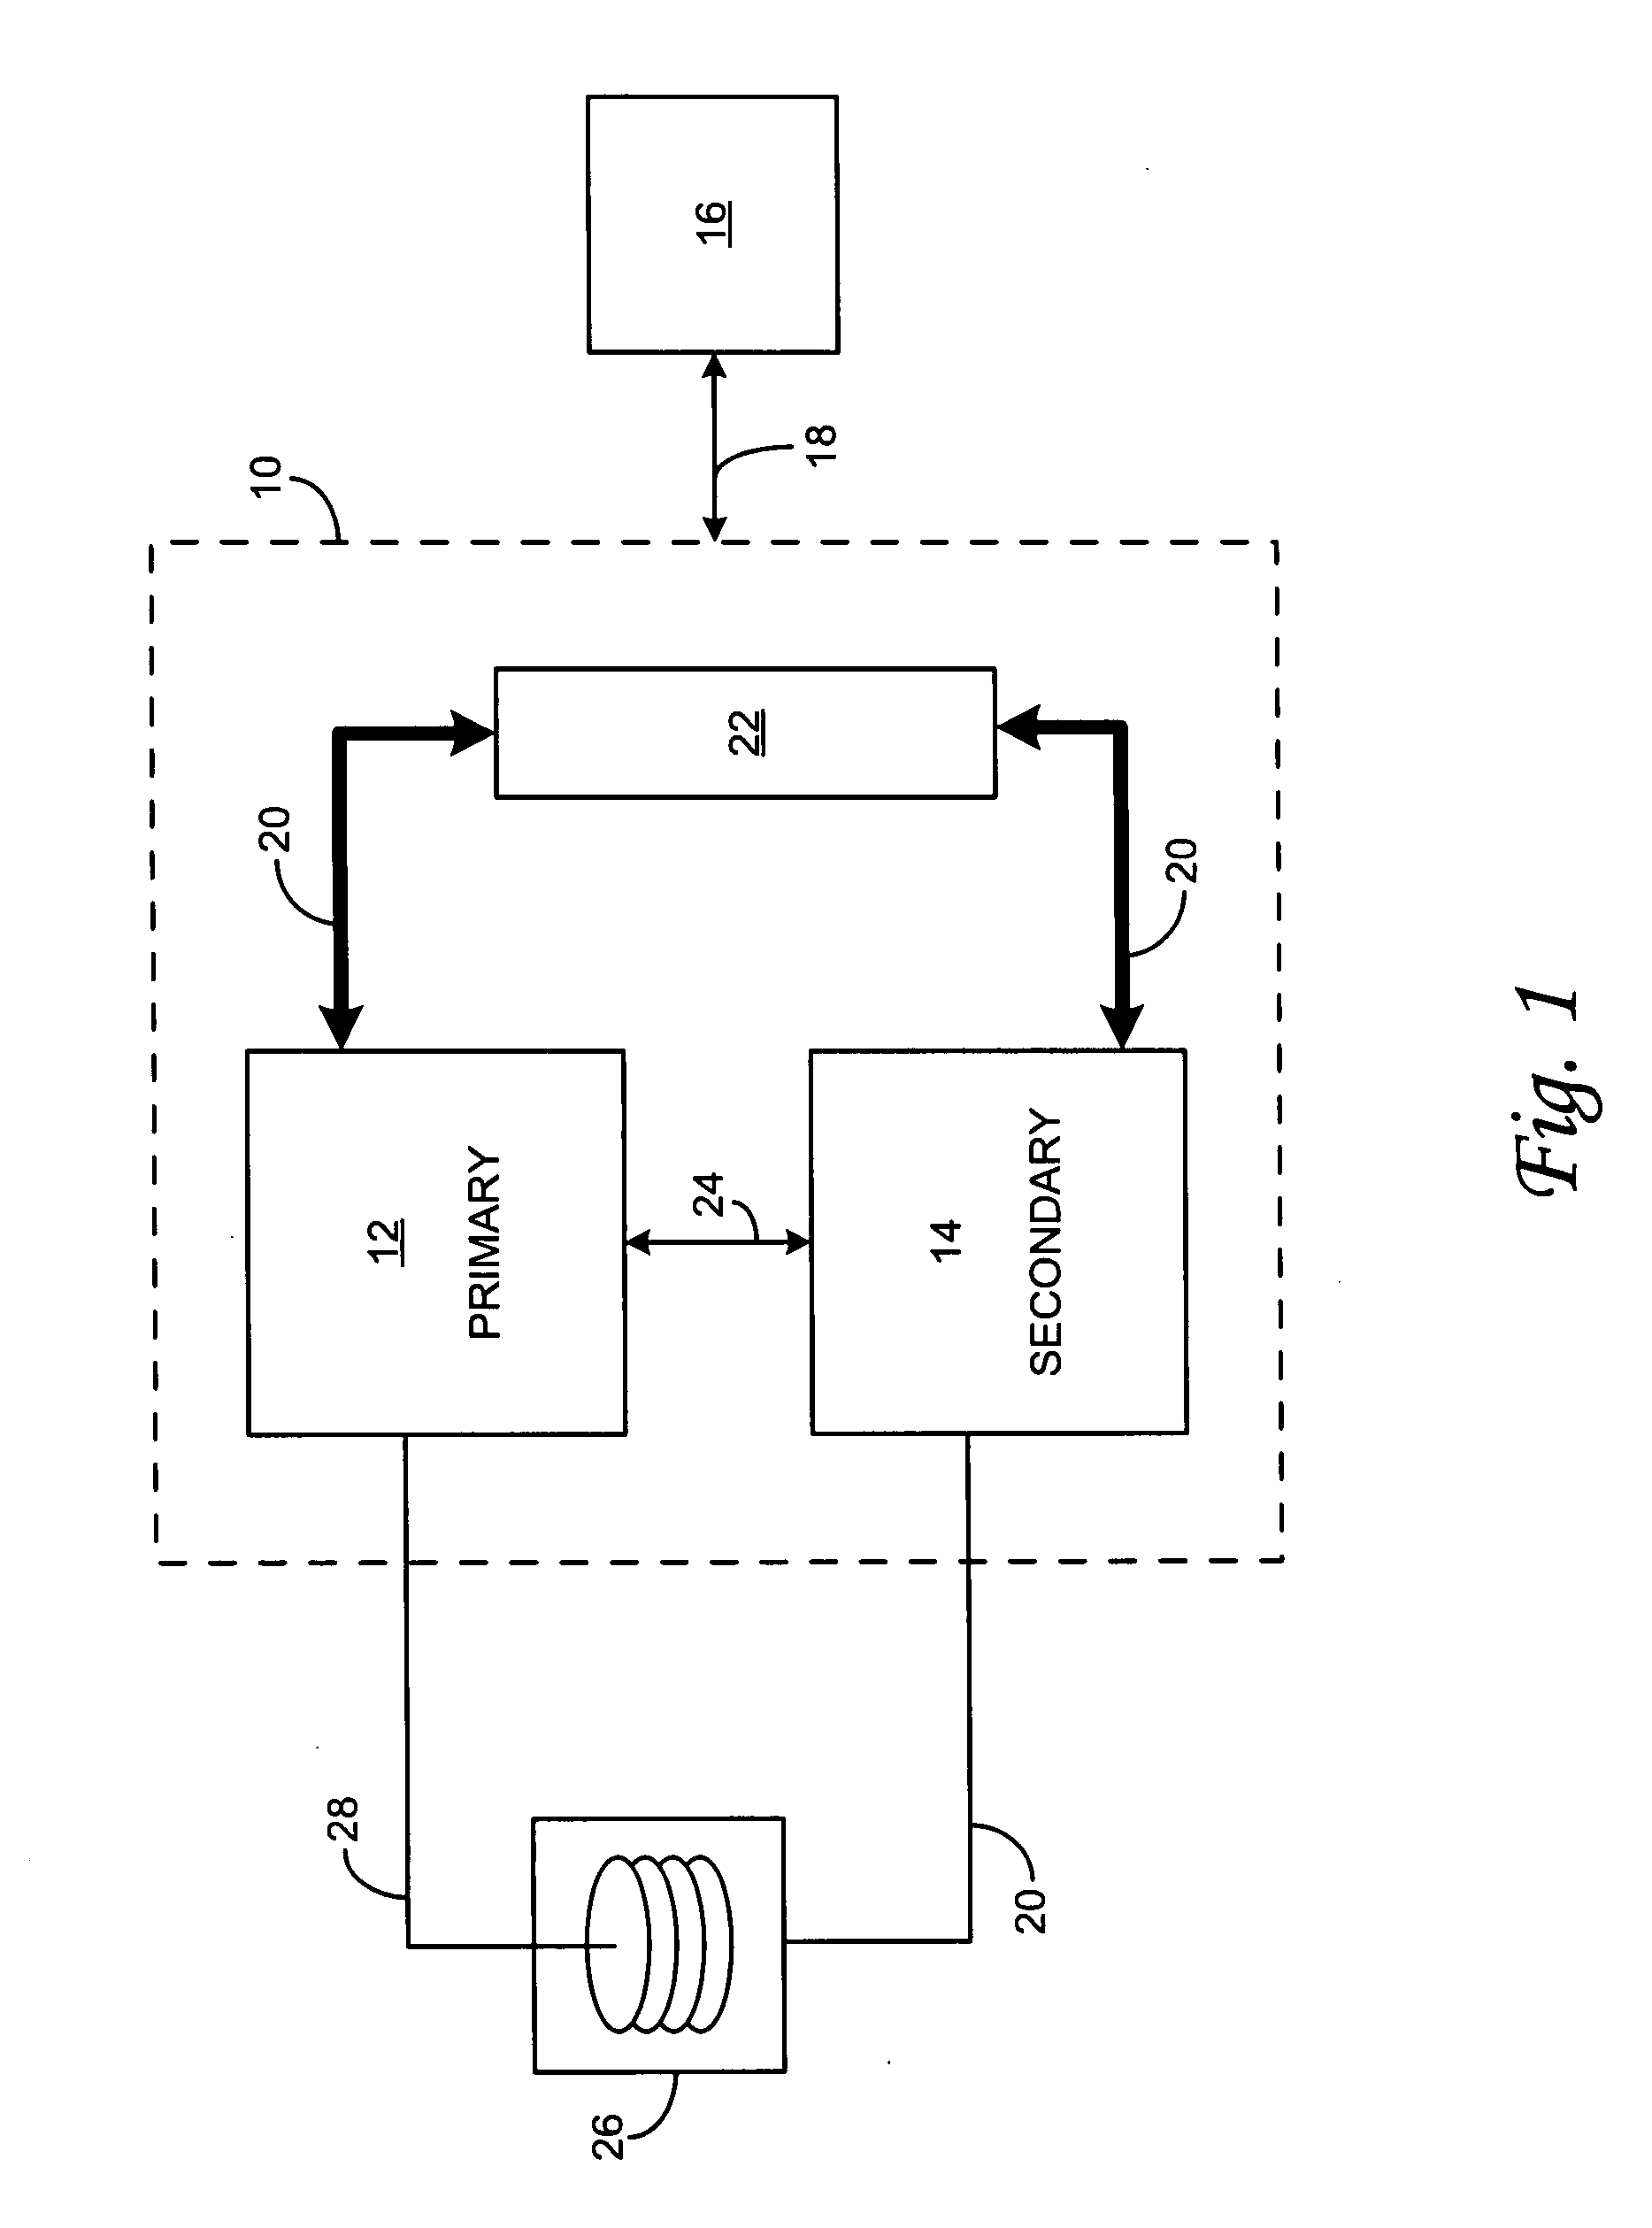 Method and system for coordinated multiple cluster failover